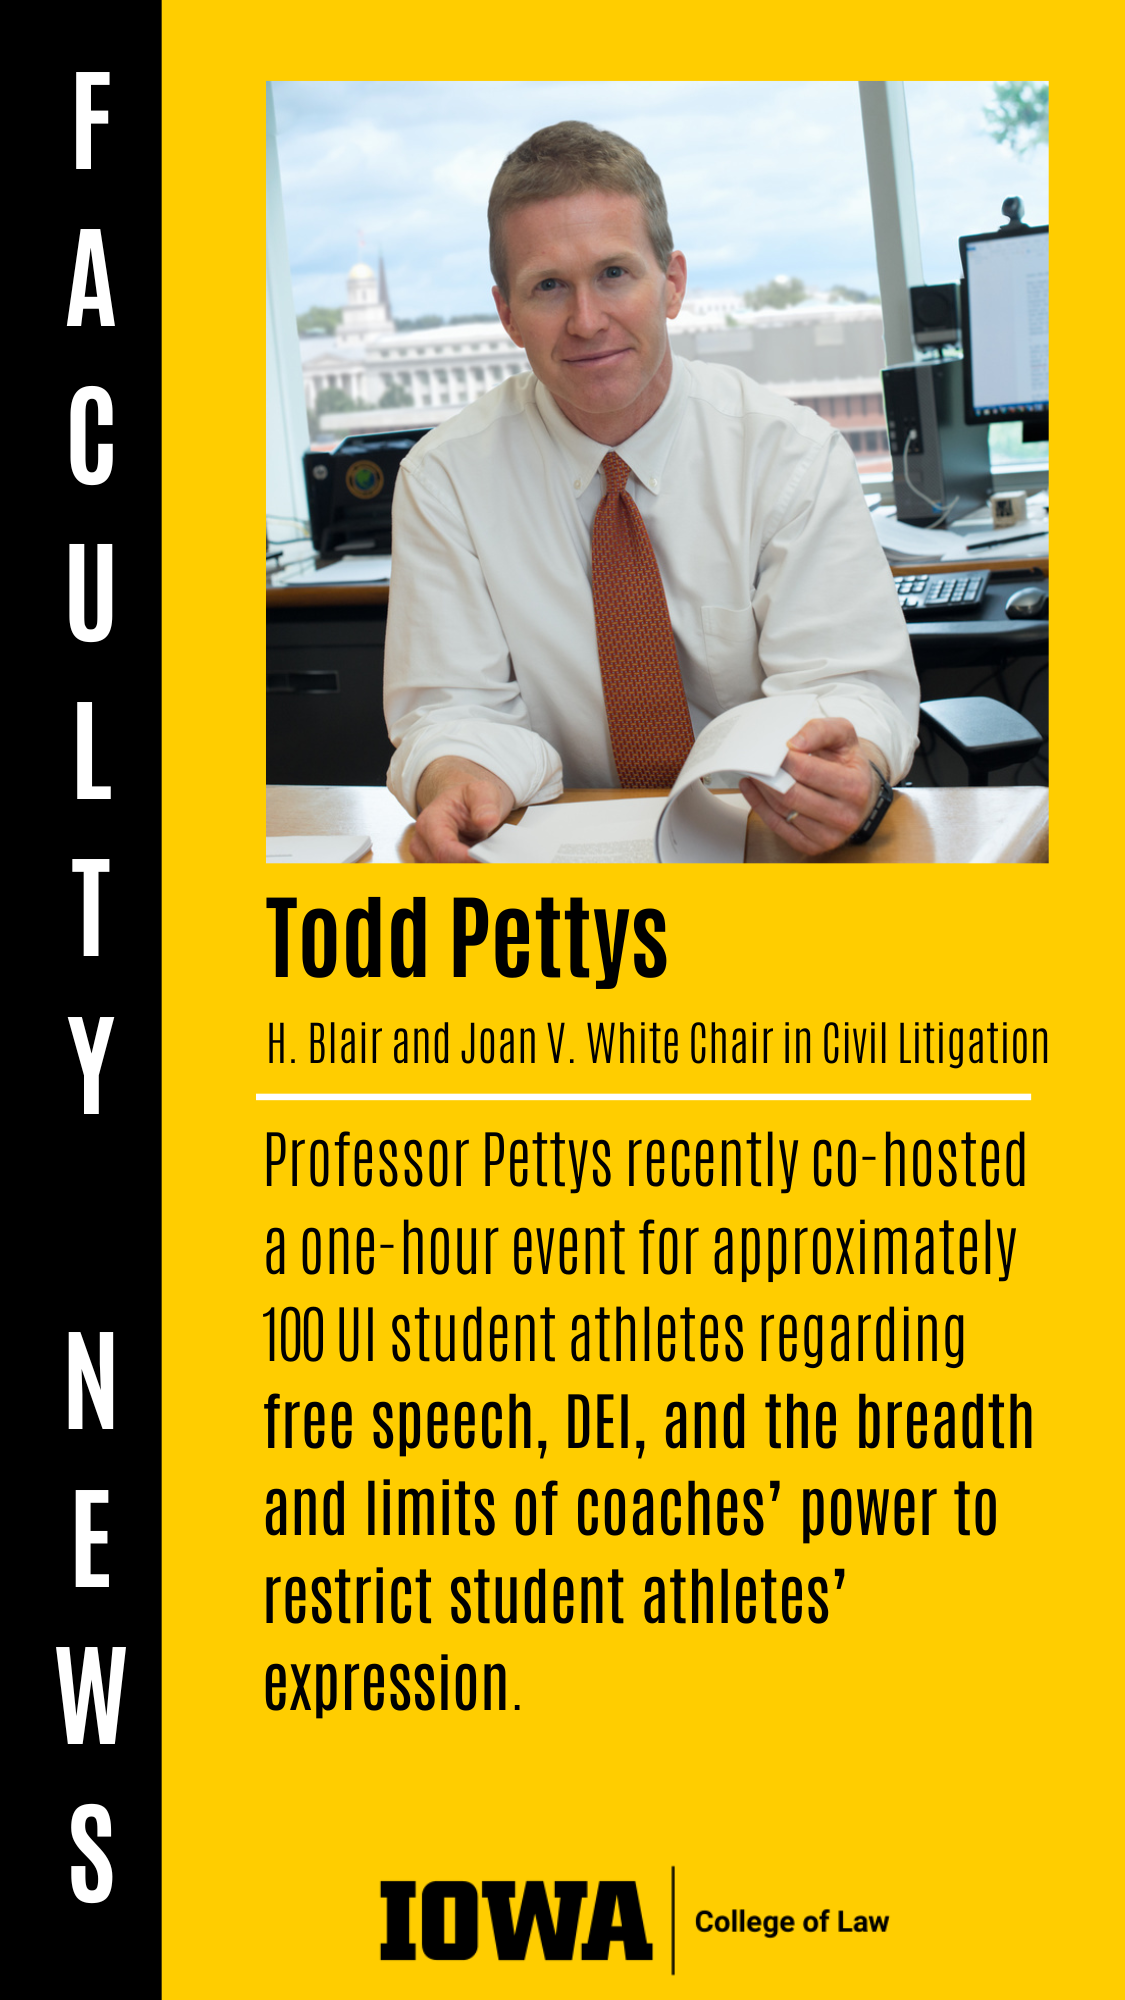 Todd Pettys H. Blair and Joan V. White Chair in Civil Litigation Professor Pettys recently co-hosted a one-hour event for approximately 100 UI student athletes regarding free speech, DEI, and the breadth and limits of coaches’ power to restrict student athletes’ expression.